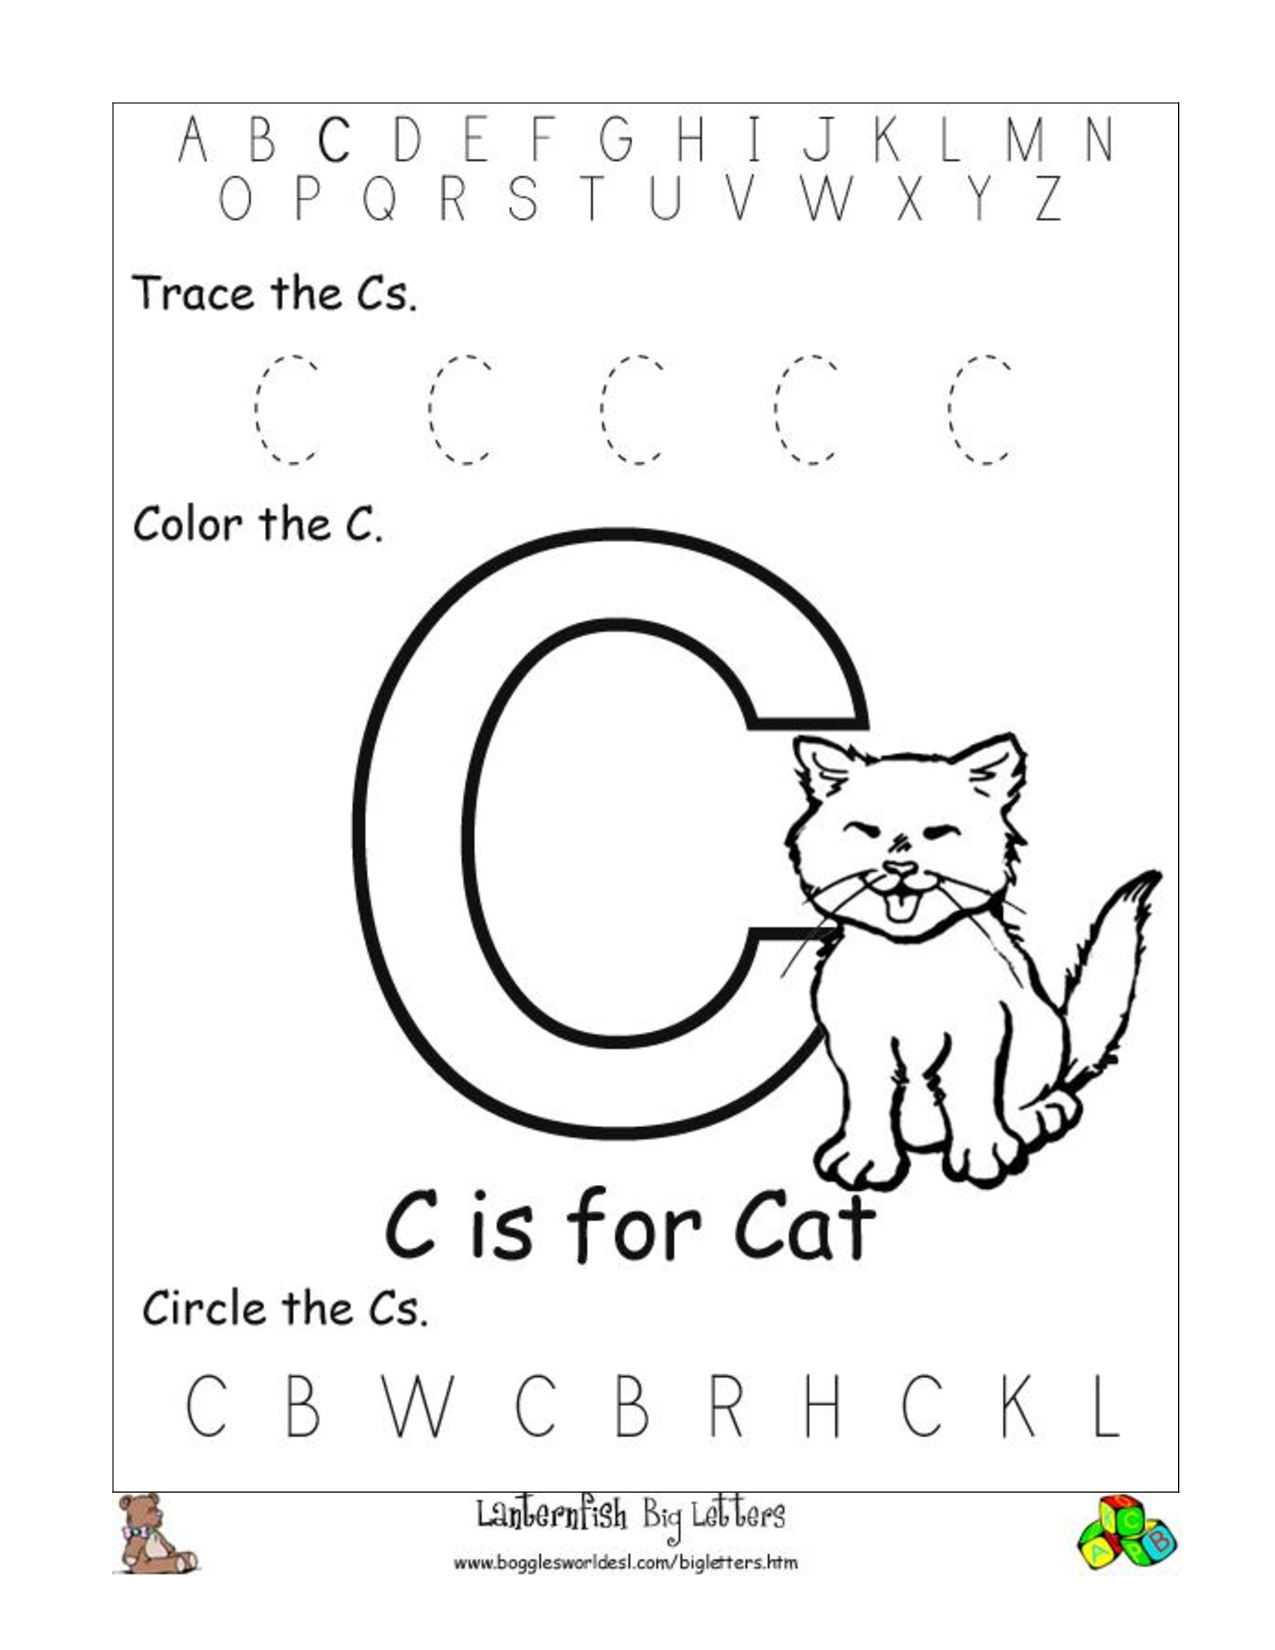 10 Best Images of Circle The Letter Worksheets For Preschool